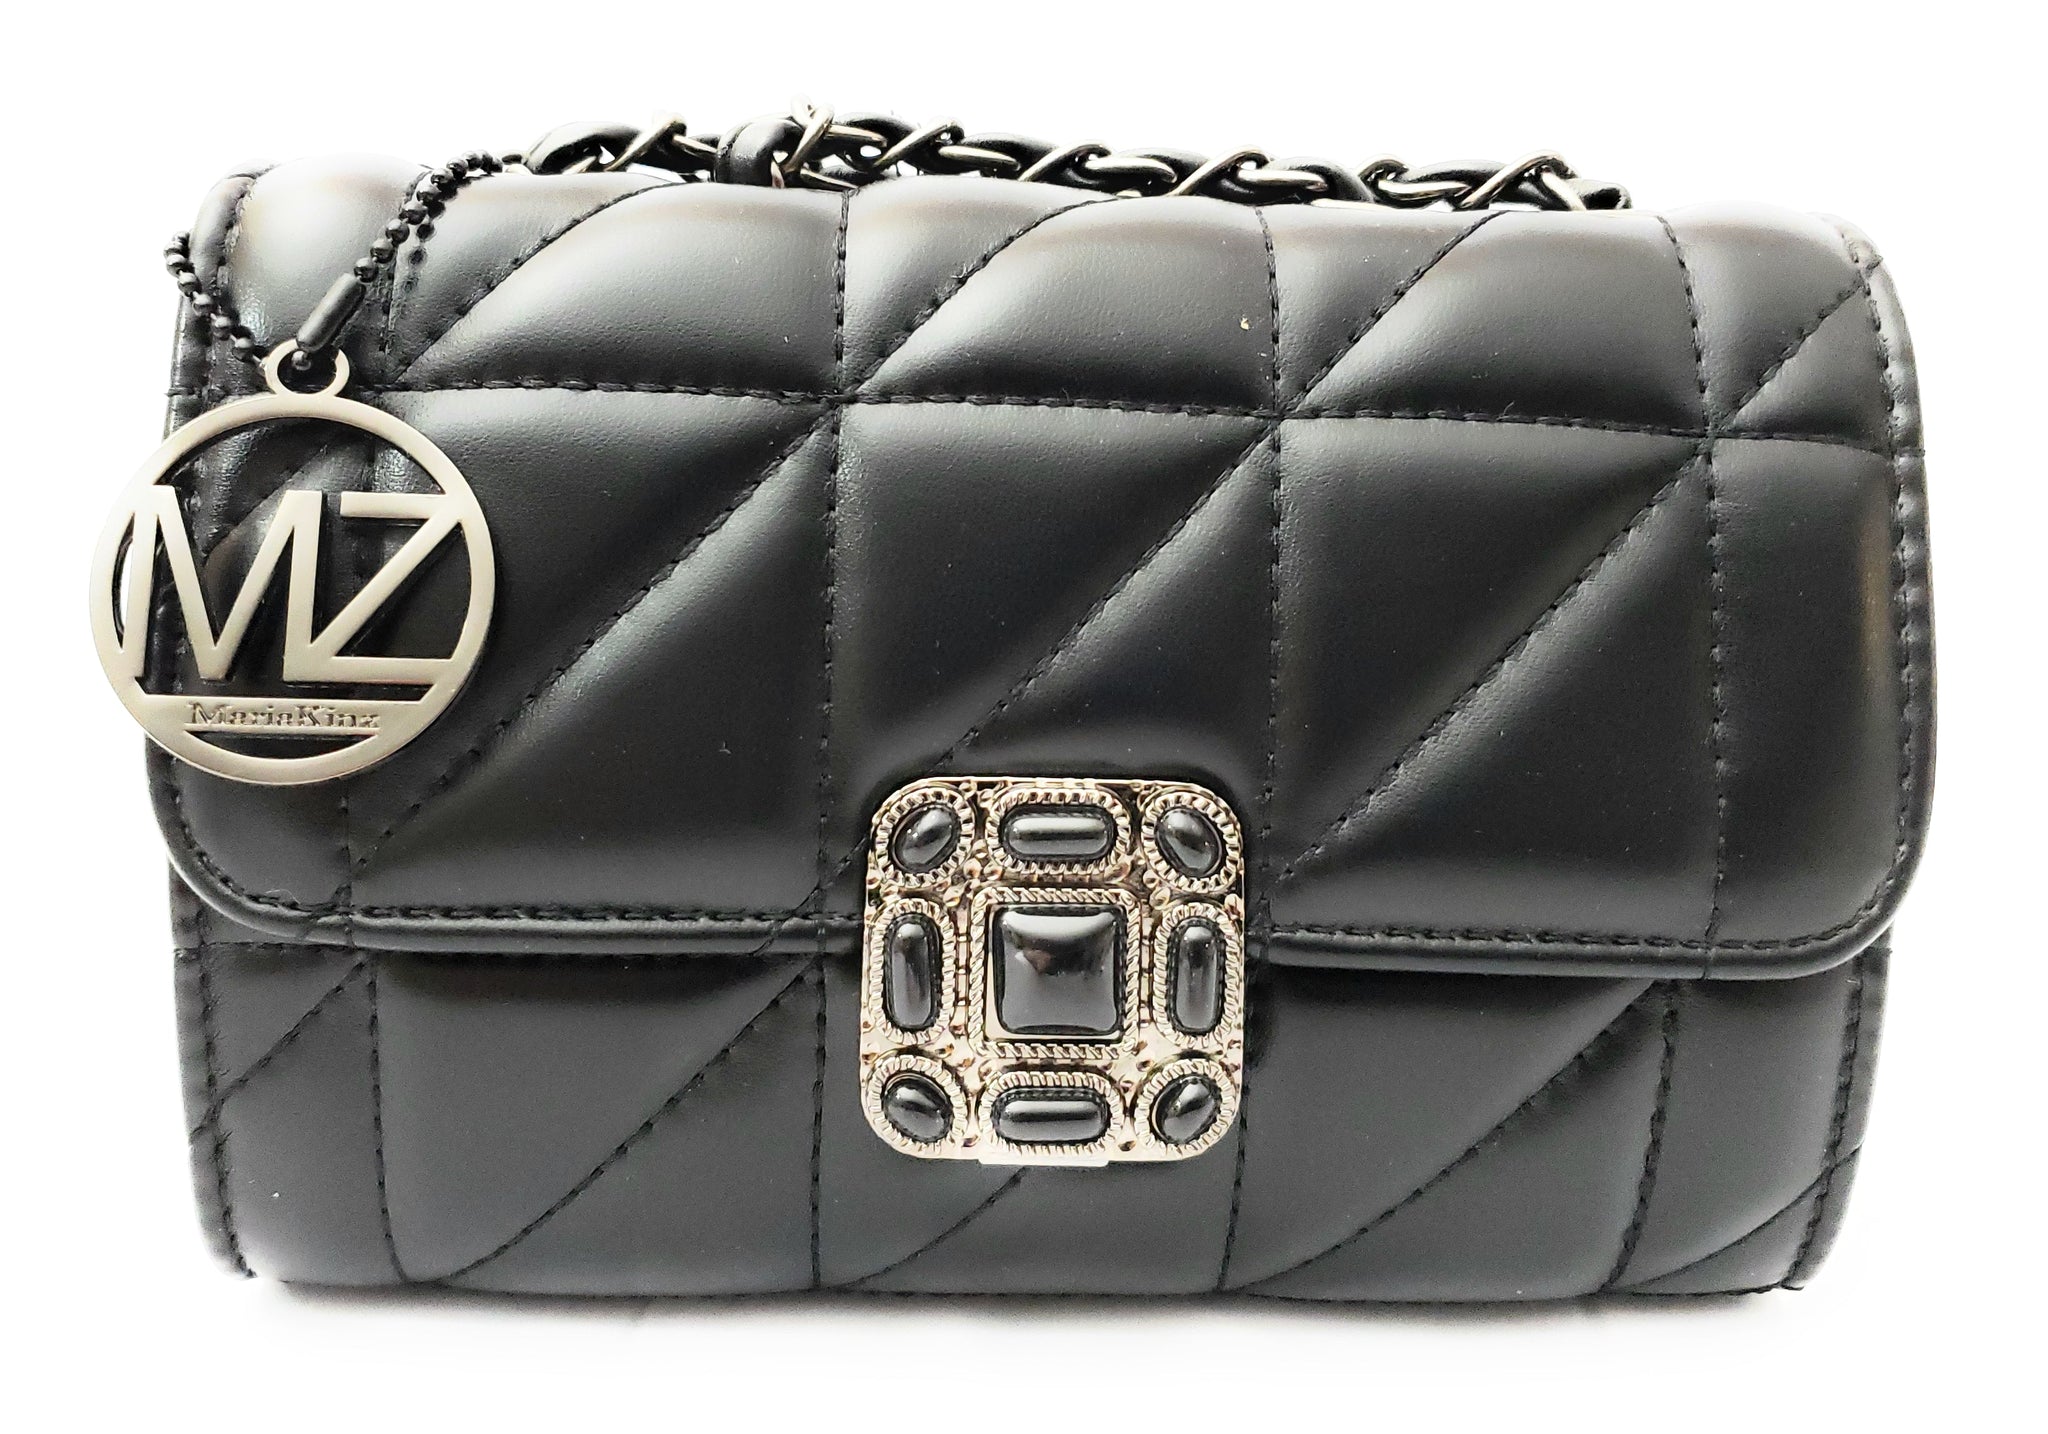 MariaKinz Leather Shoulder/Crossbody Quilted Bag and Mid Size Black Pu